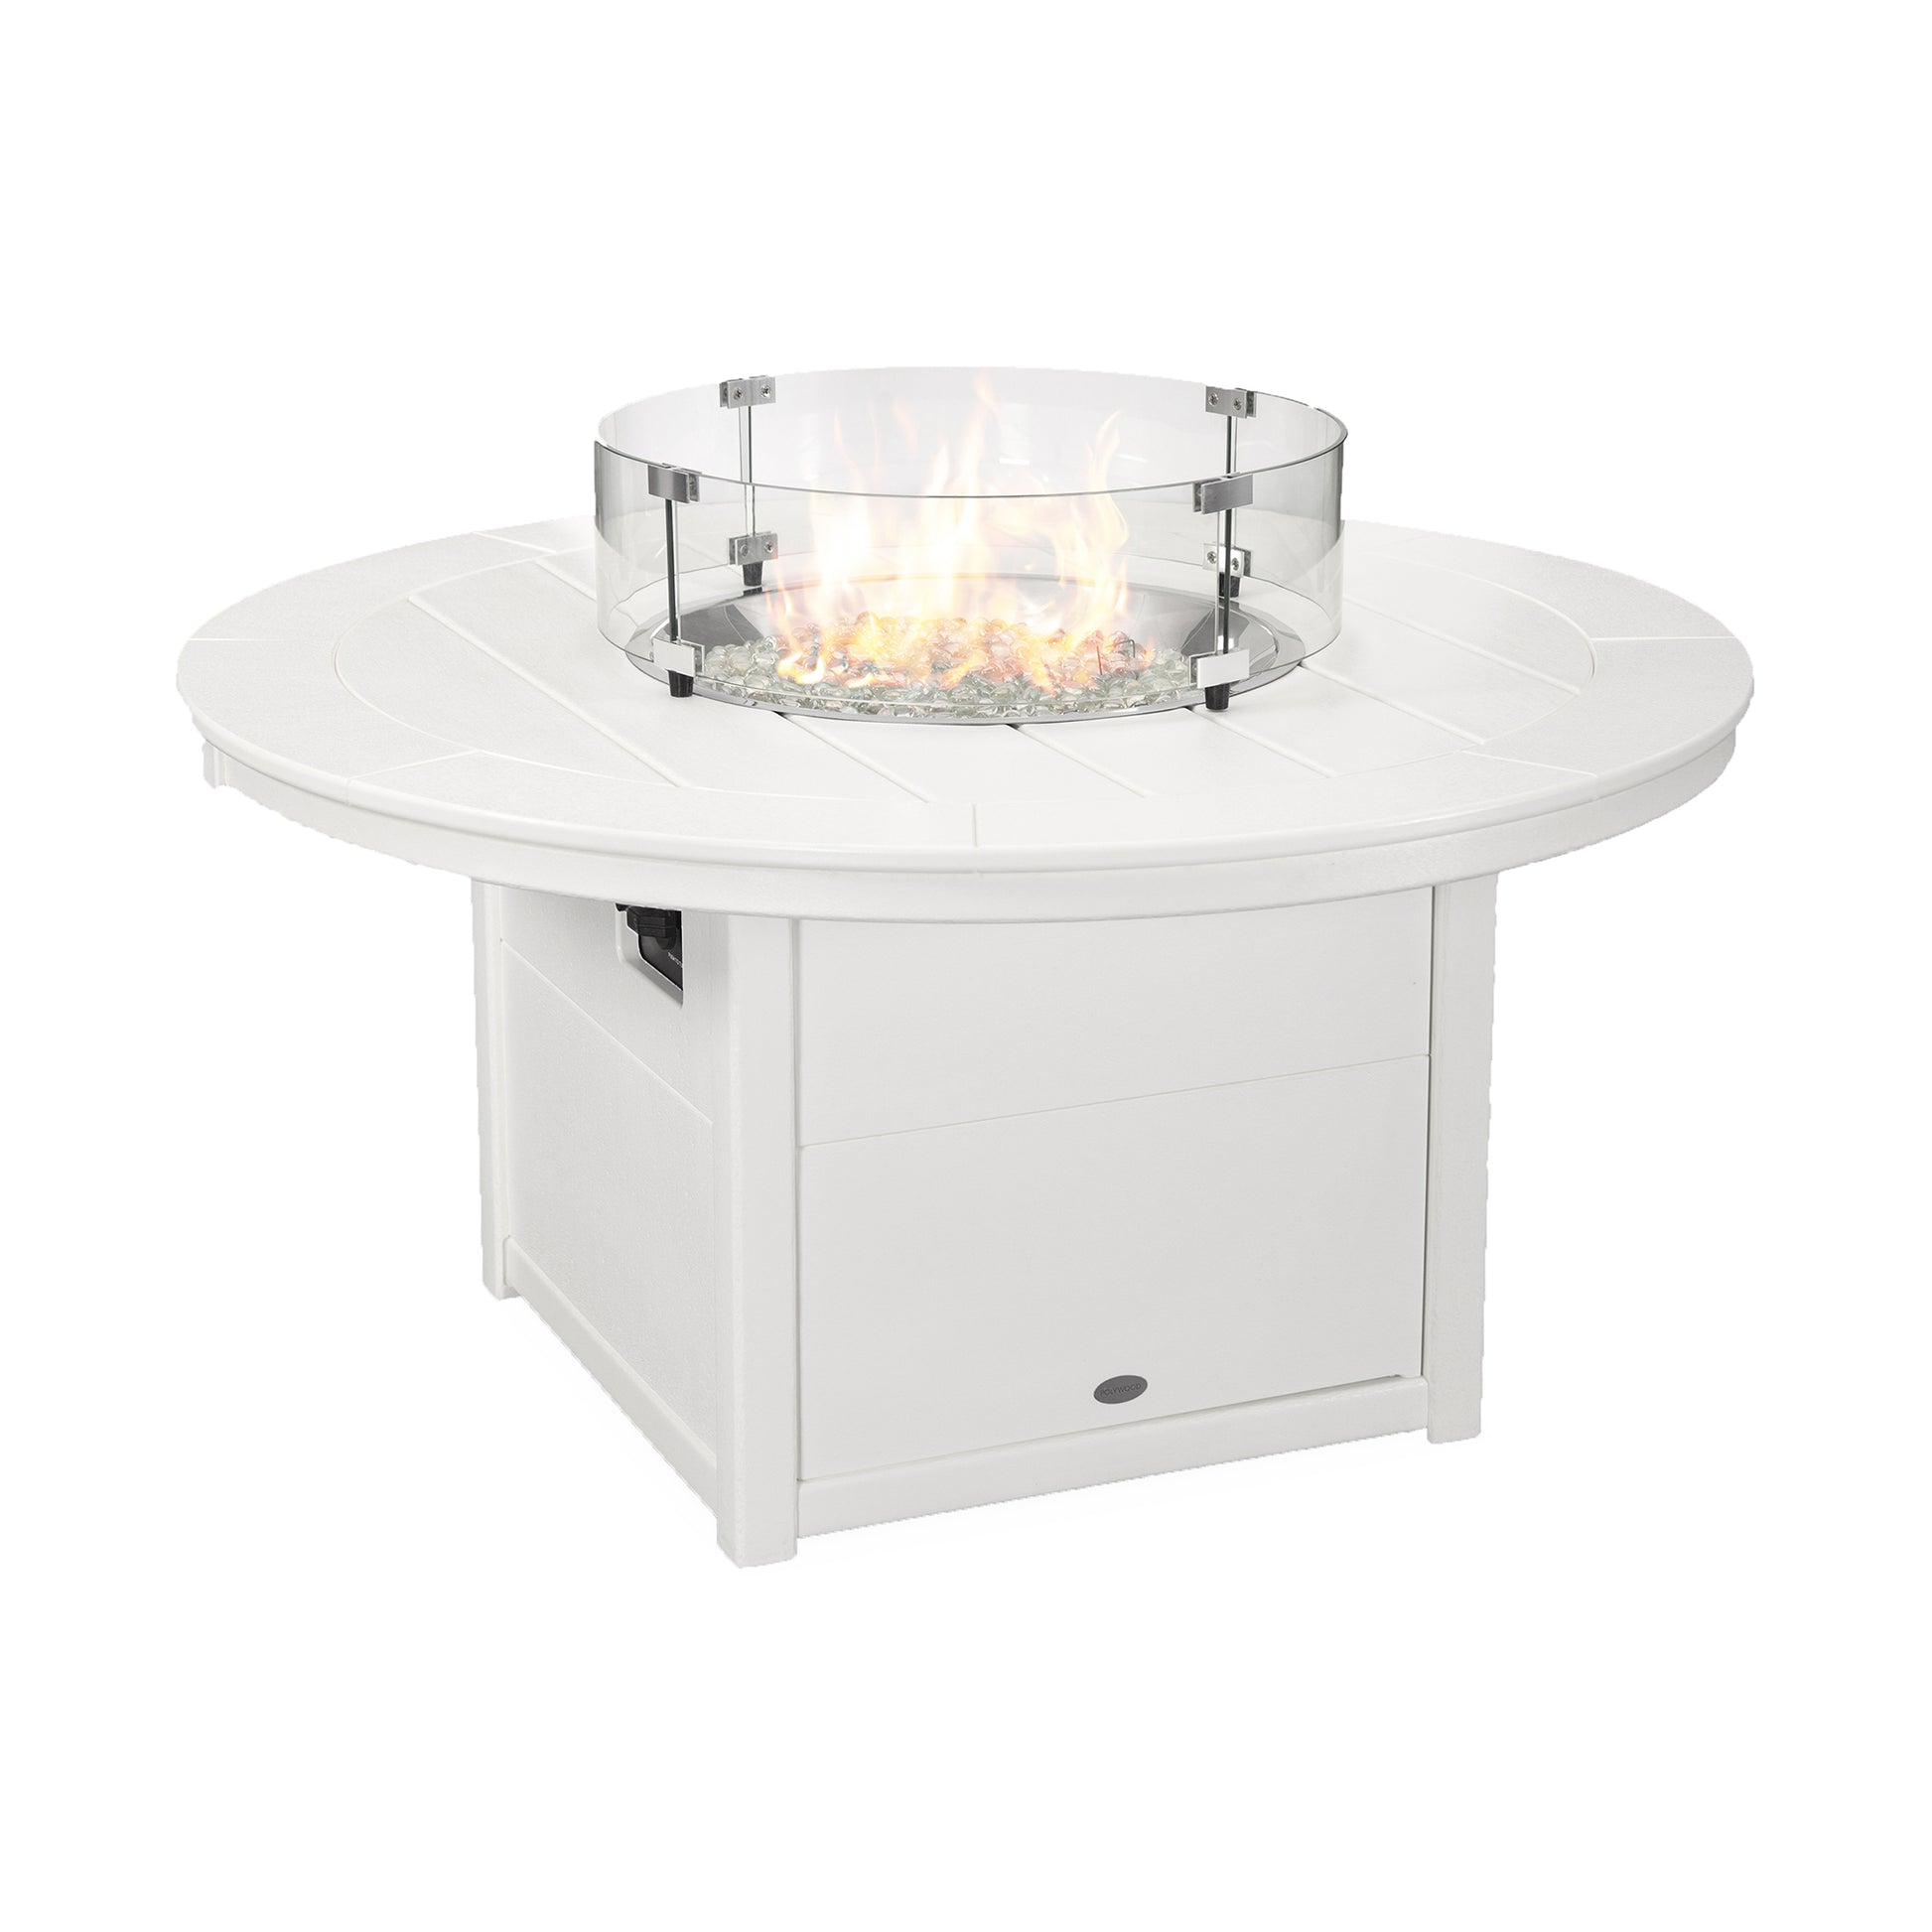 A circular white outdoor POLYWOOD Round 48" fire pit table with a visible flame under a glass wind guard, made from durable POLYWOOD lumber, featuring a lower cabinet and a flat table surface surrounding the fire area.